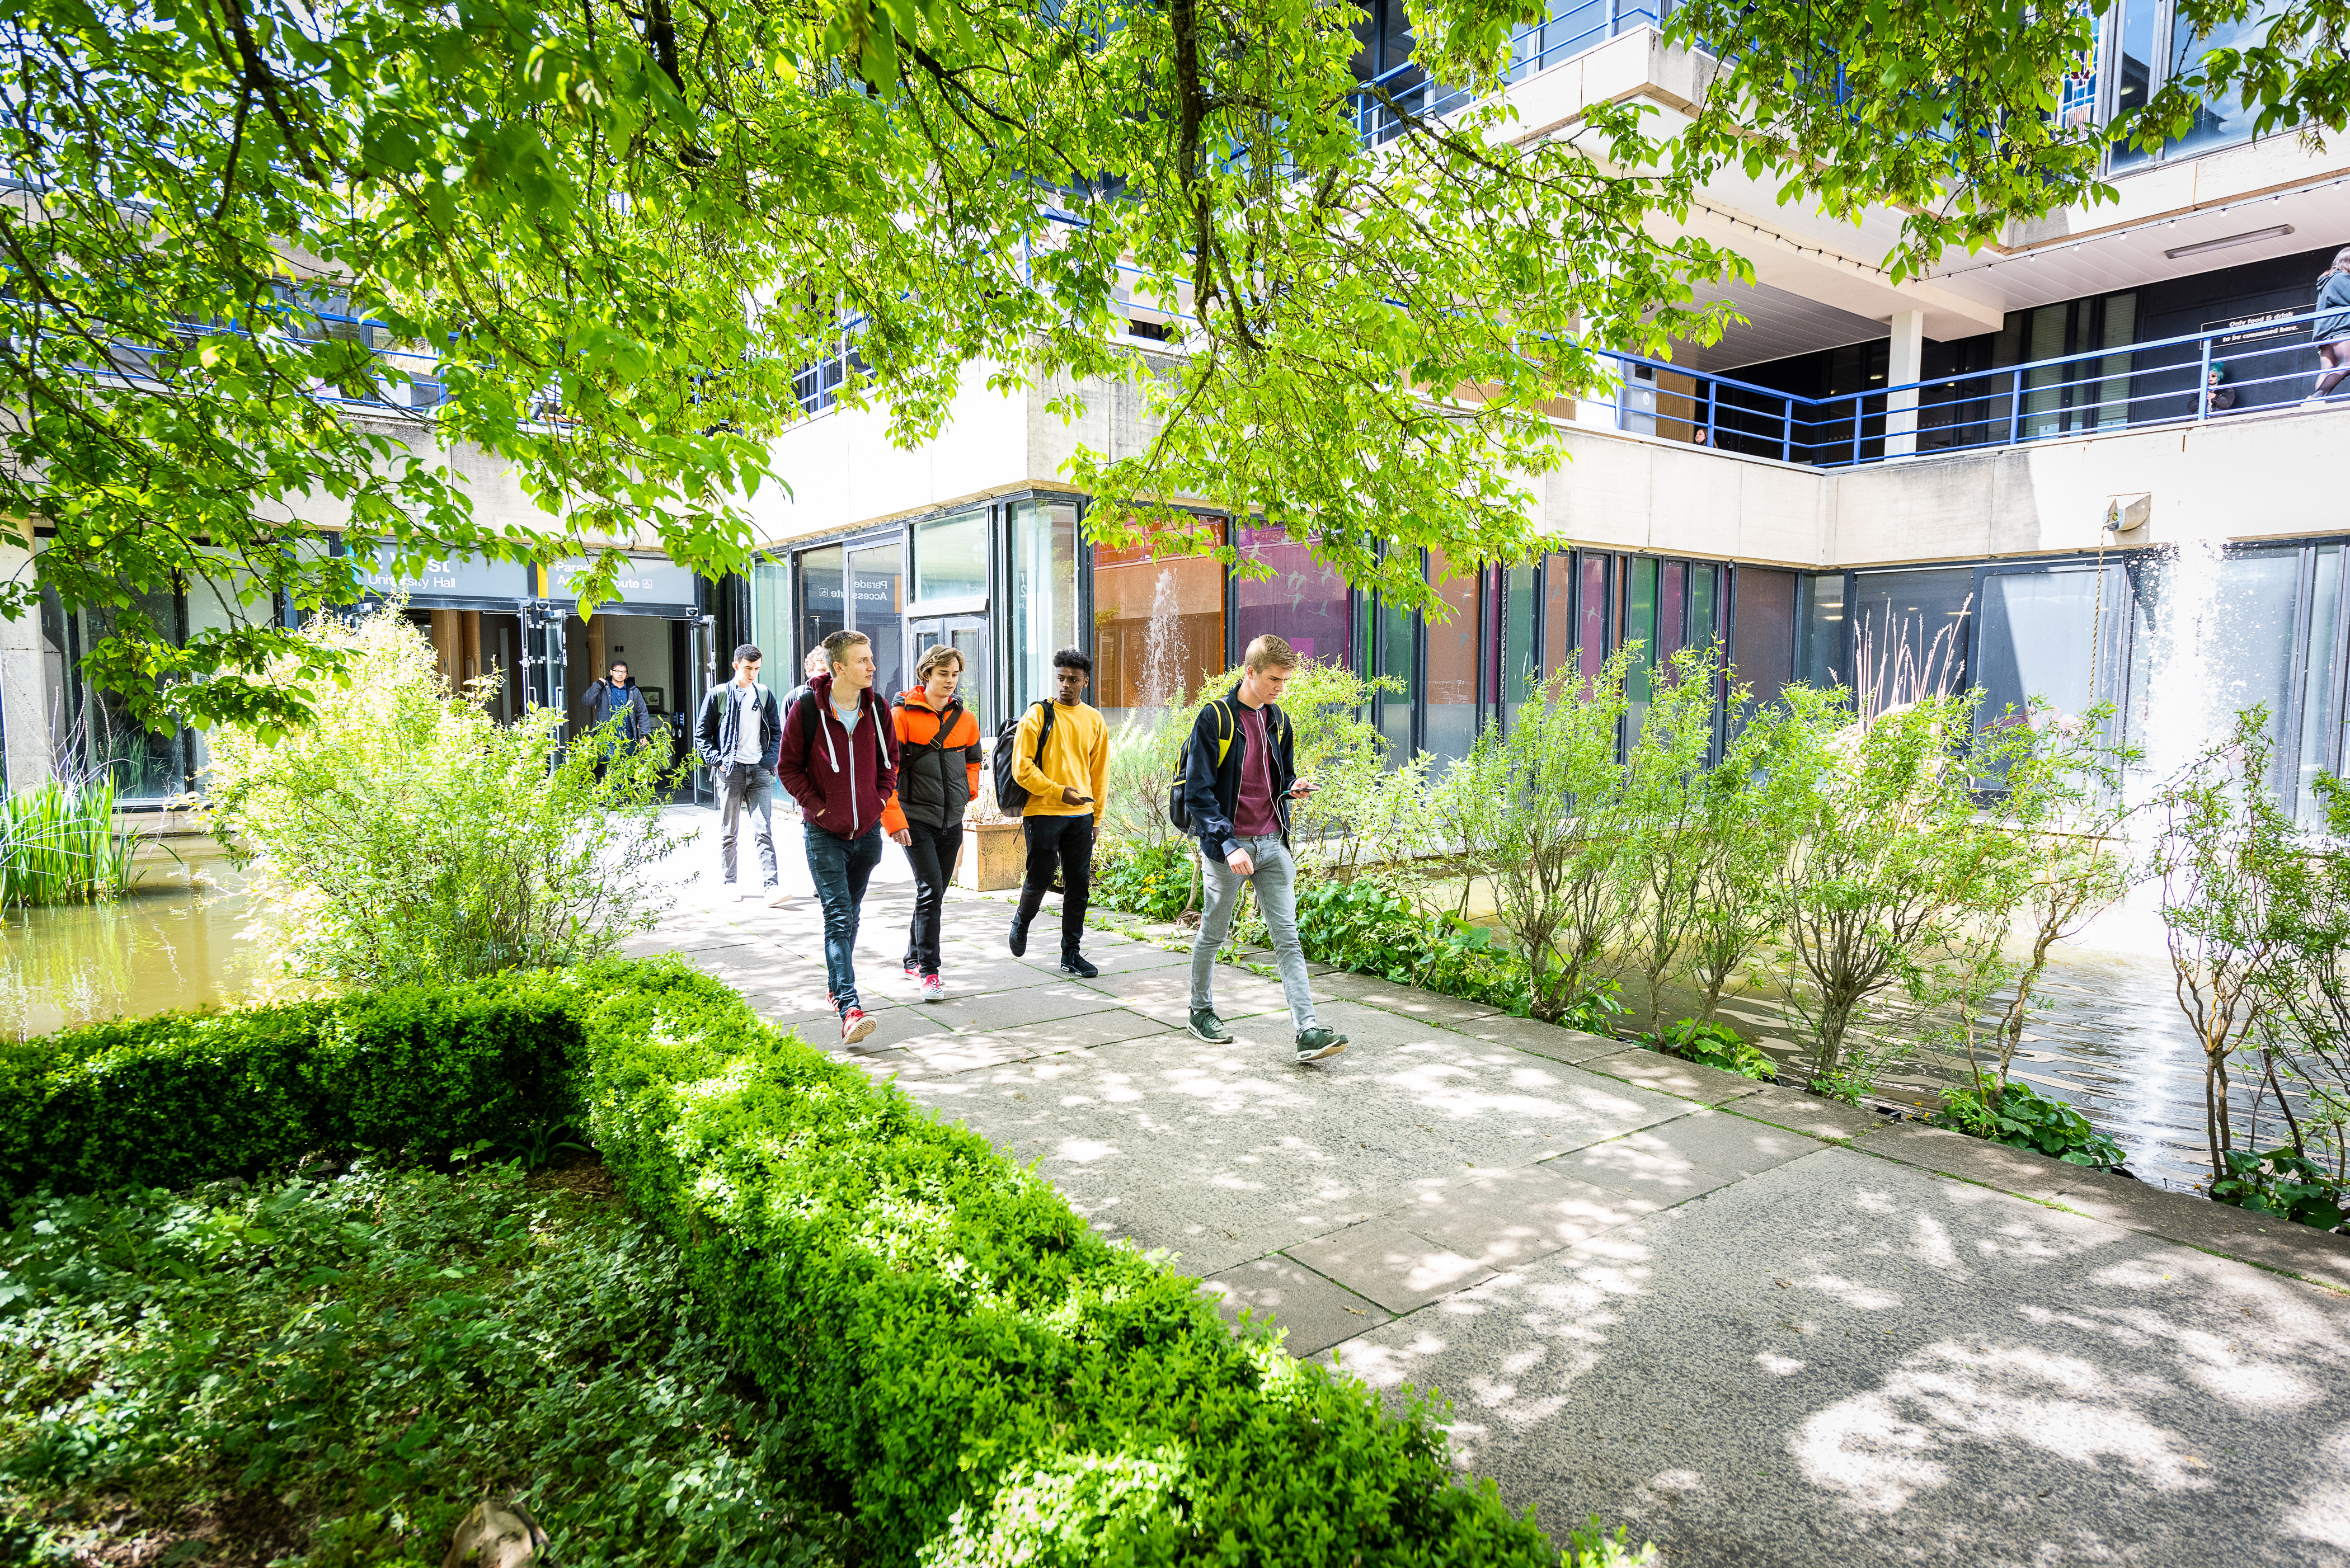 Students walking under trees covered with green leaves.